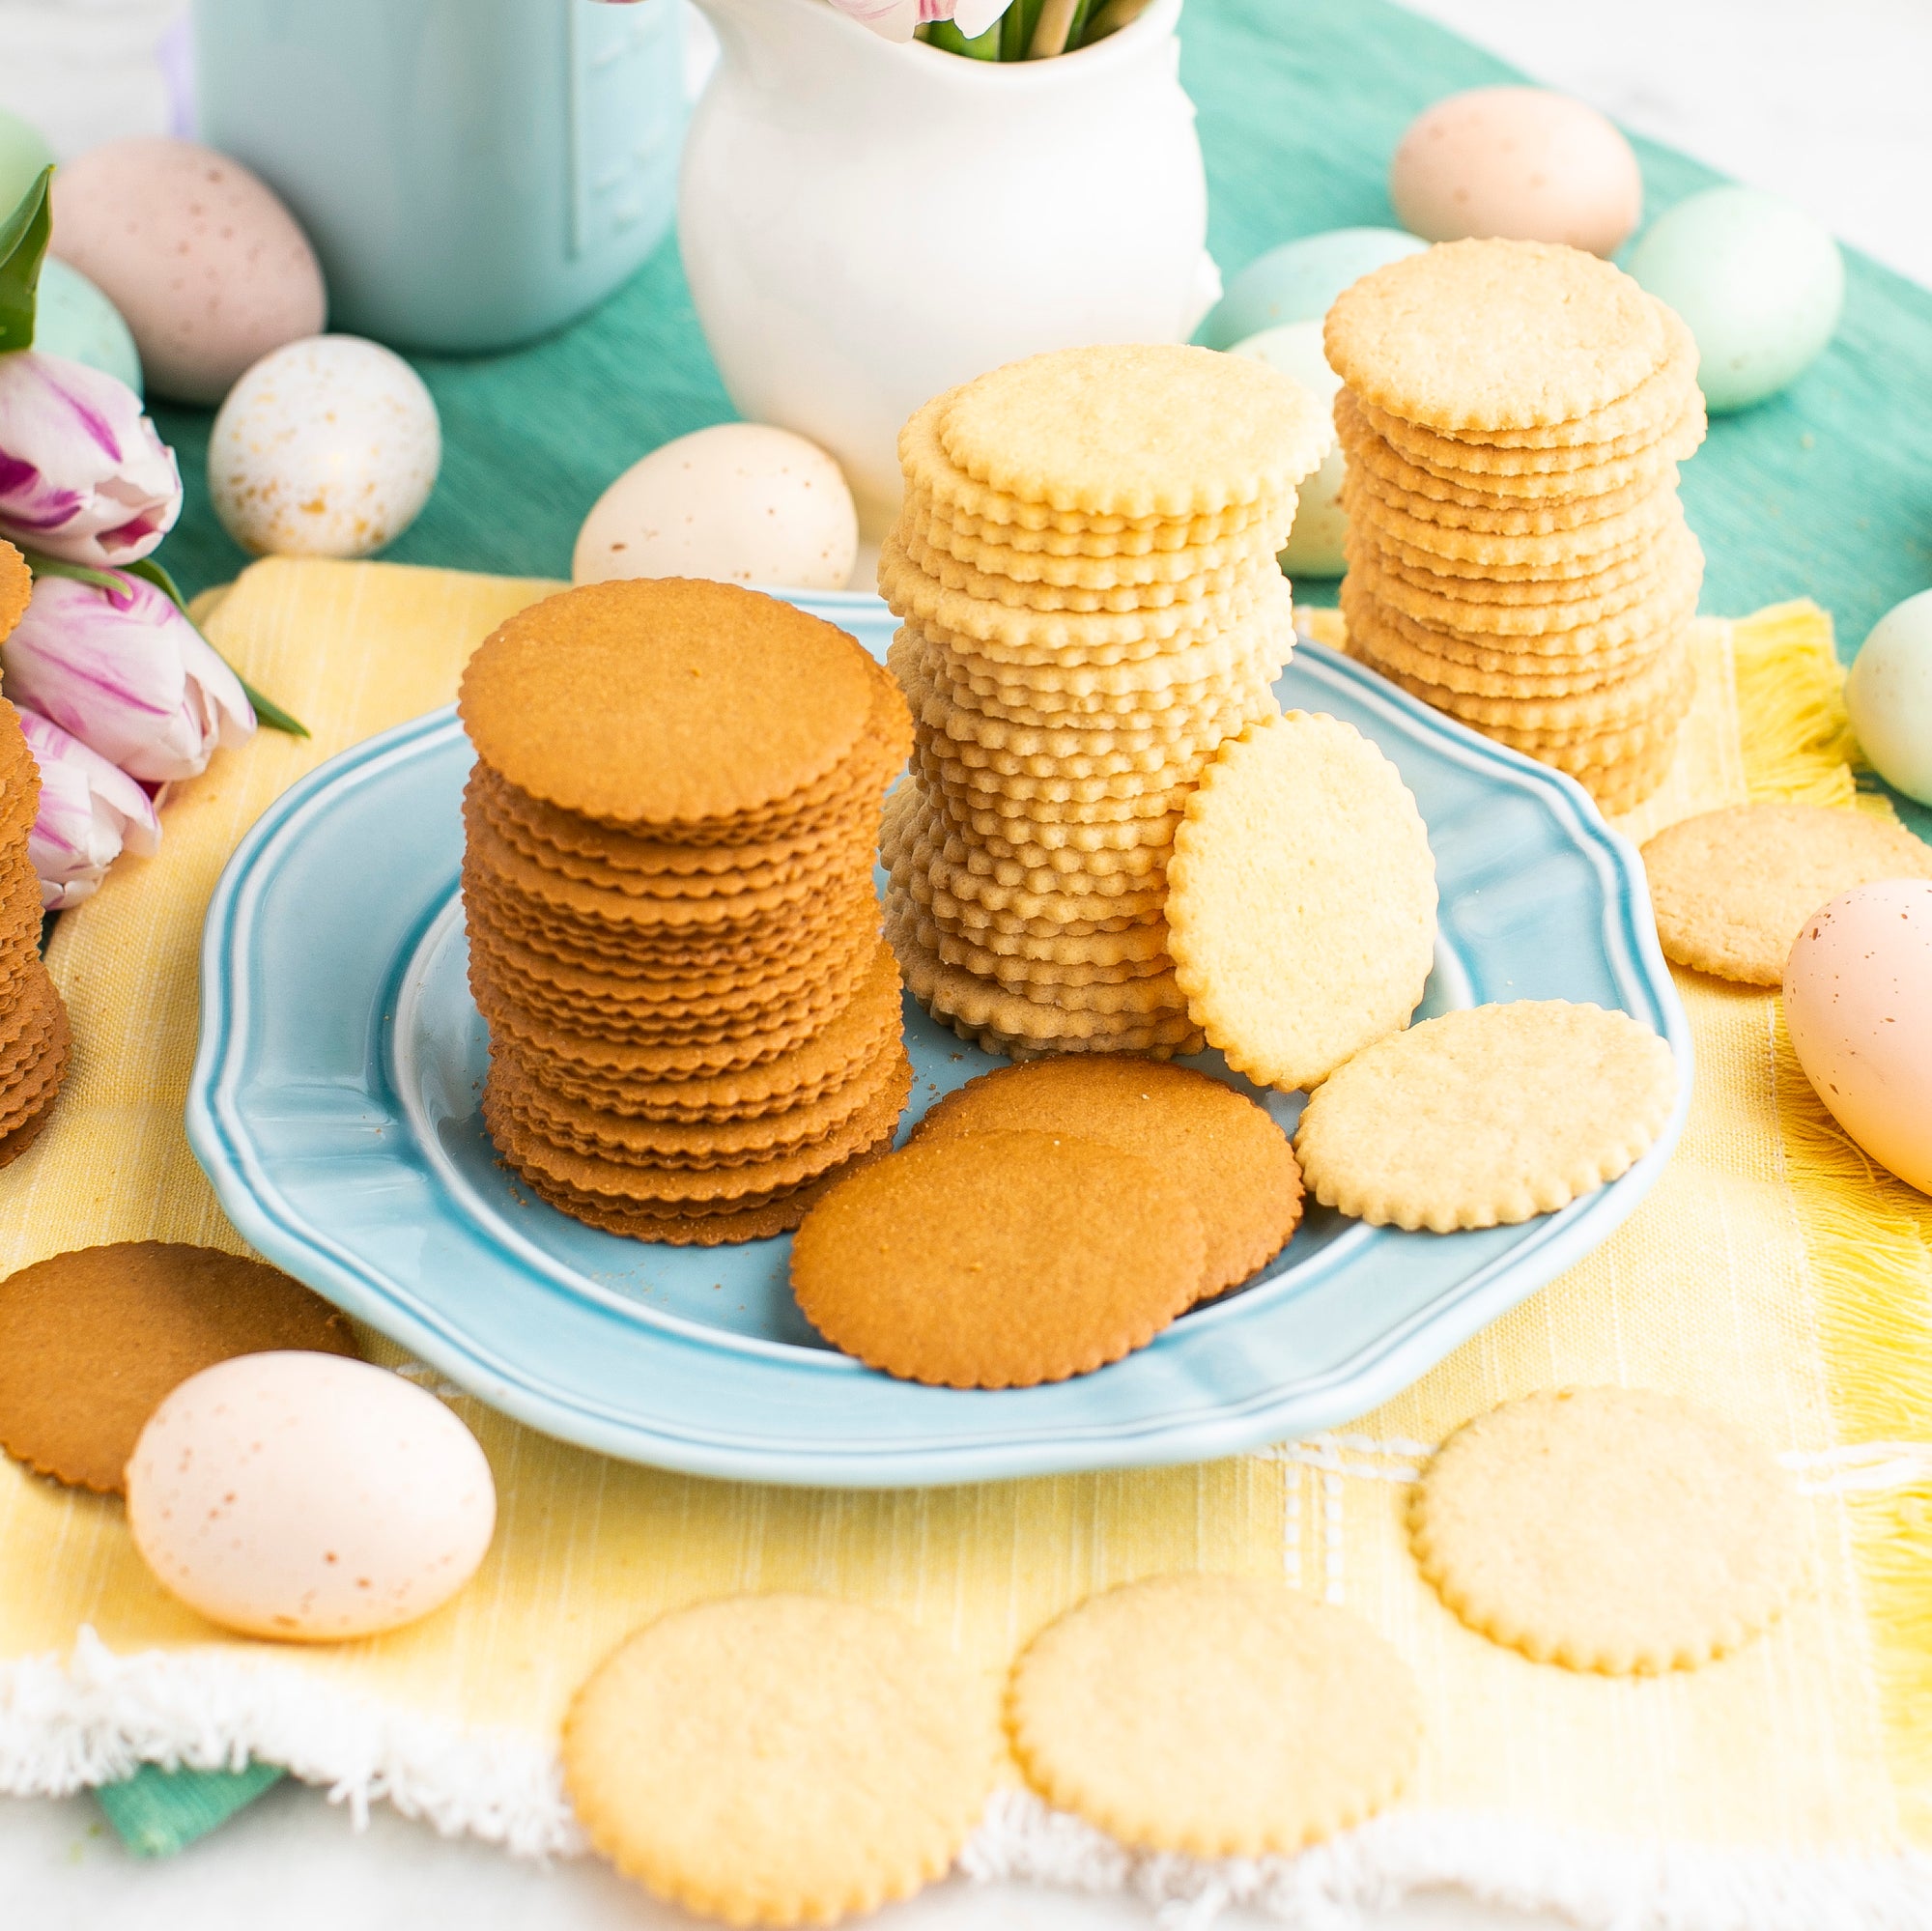 "Happy Easter" Sugar & Ginger Spice Moravian Cookie Gift Tin